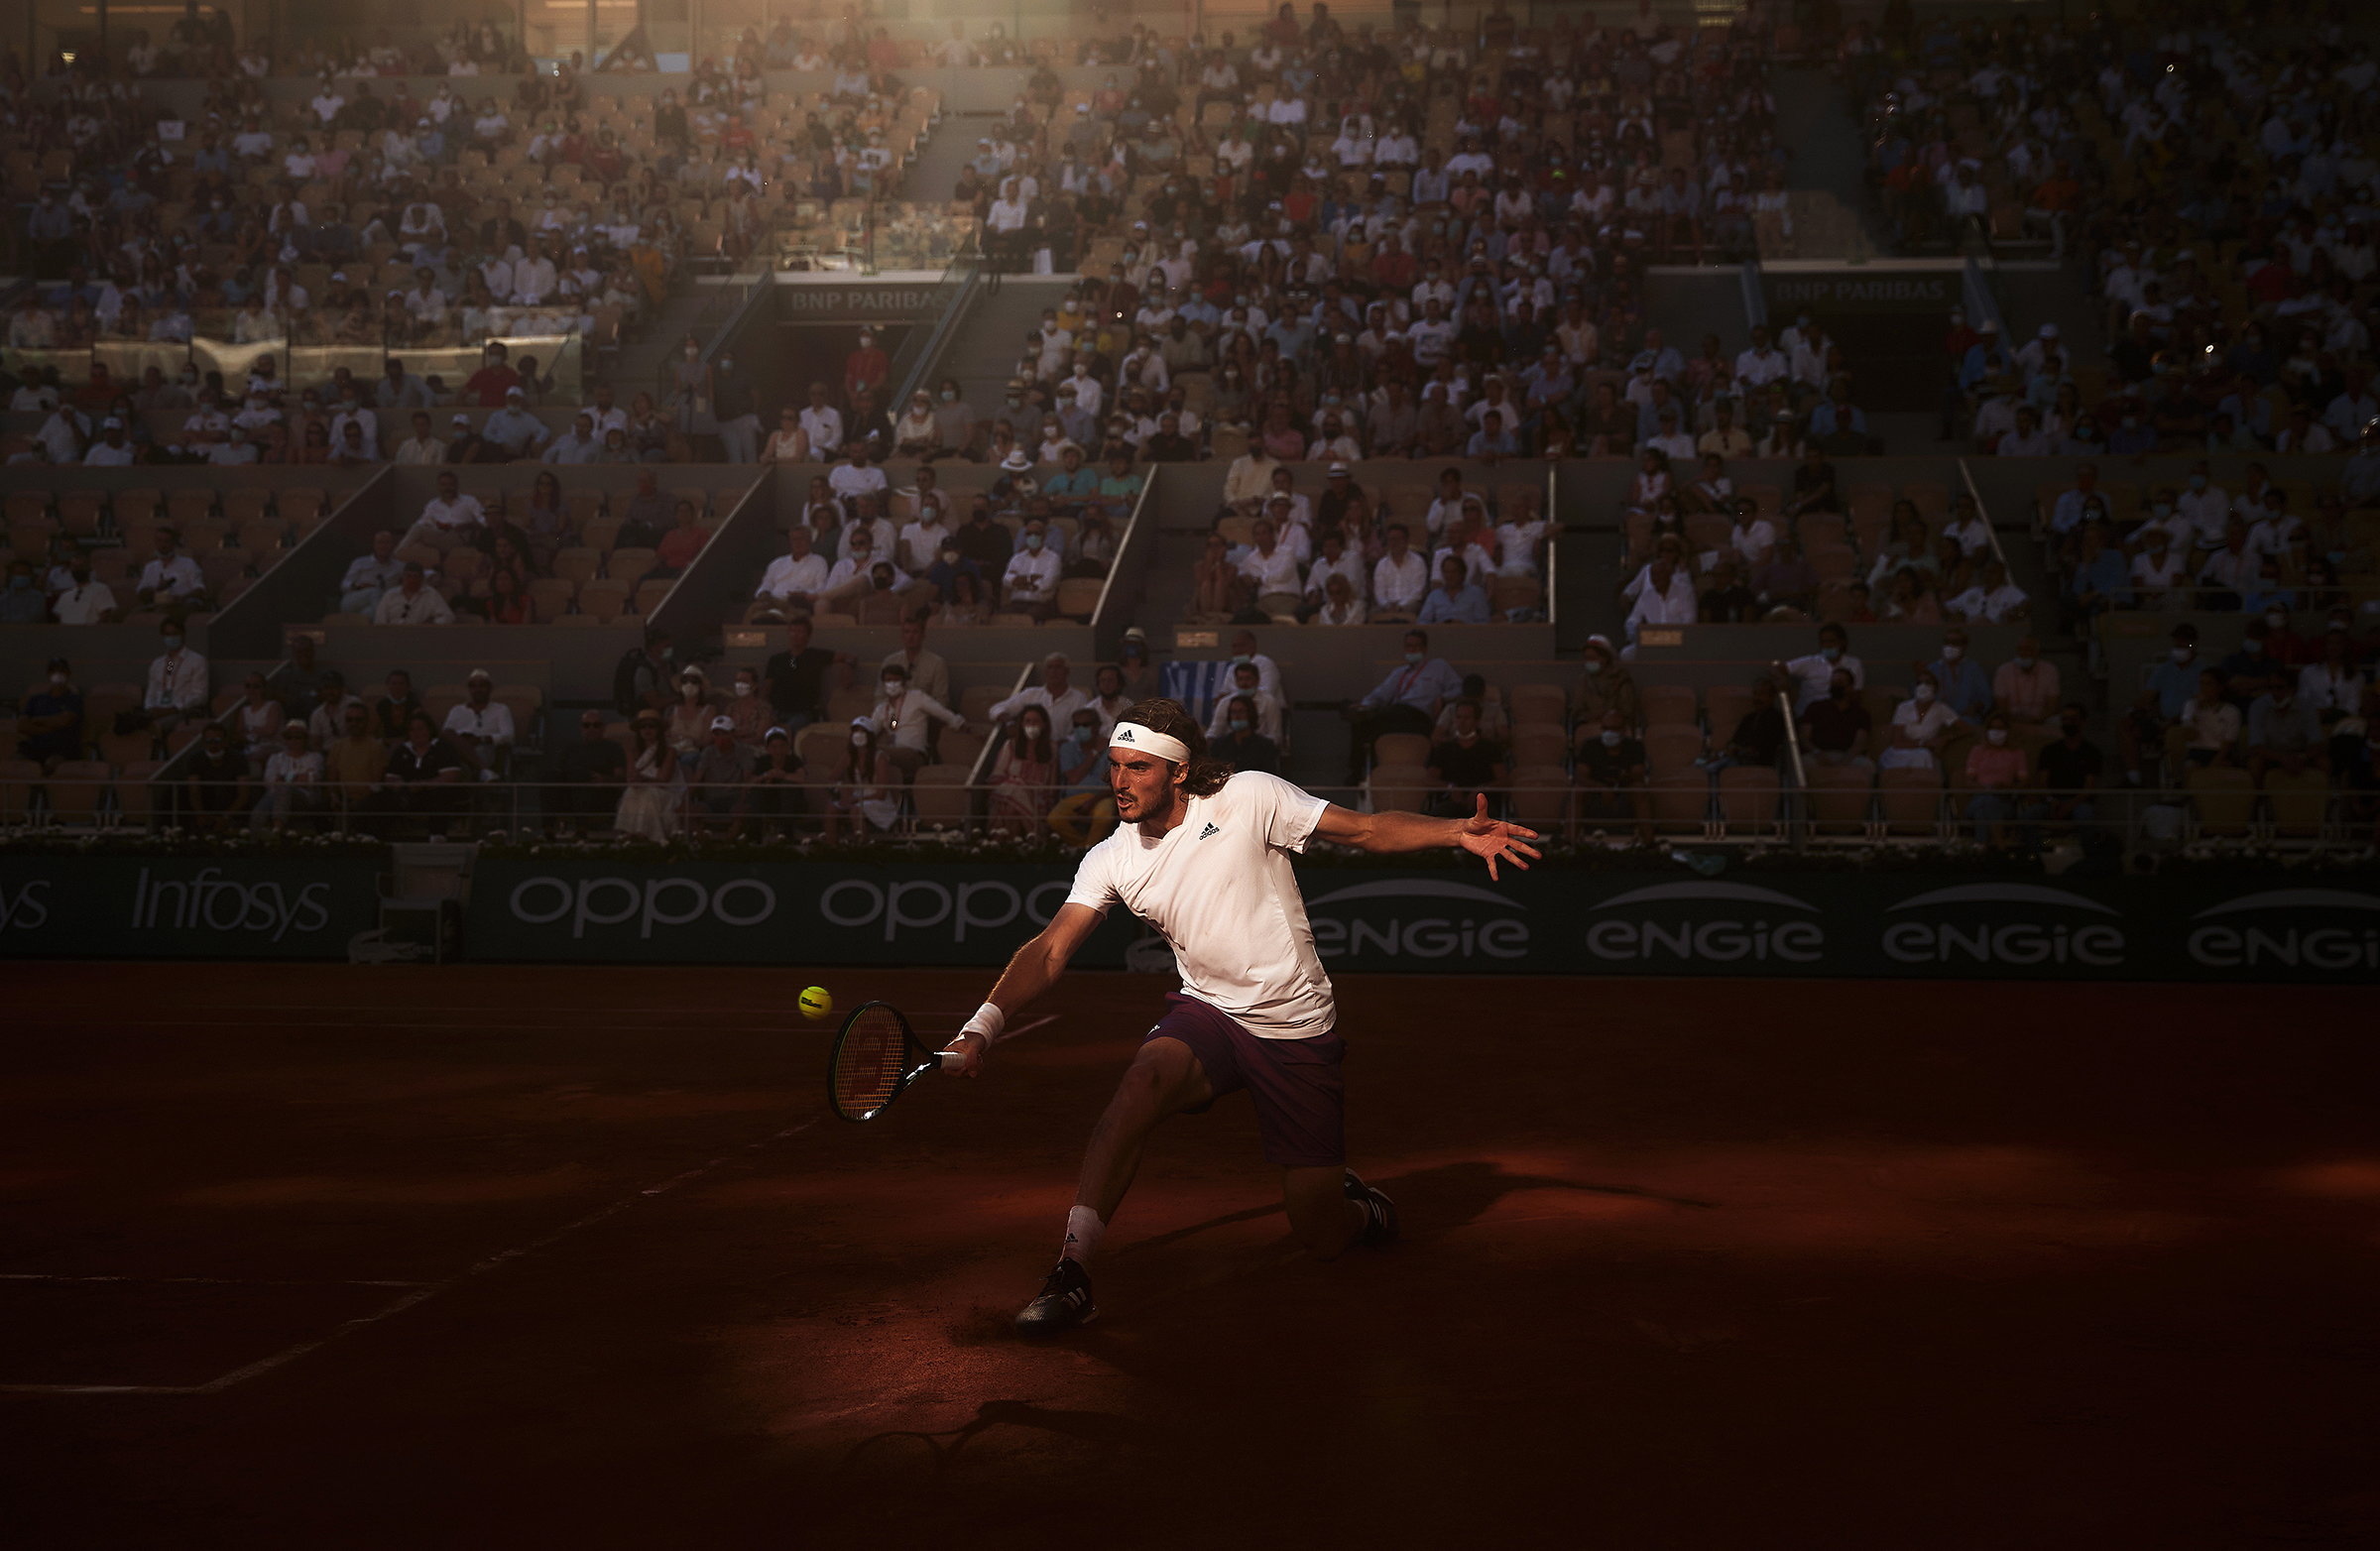 Stefanos Tsitsipas of Greece plays a backhand in his match against Novak Djokovic of Serbia during the Men's Singles Final match of the French Open in Paris on June 13. Djokovic won the final in five sets. (Julian Finney—Getty Images)